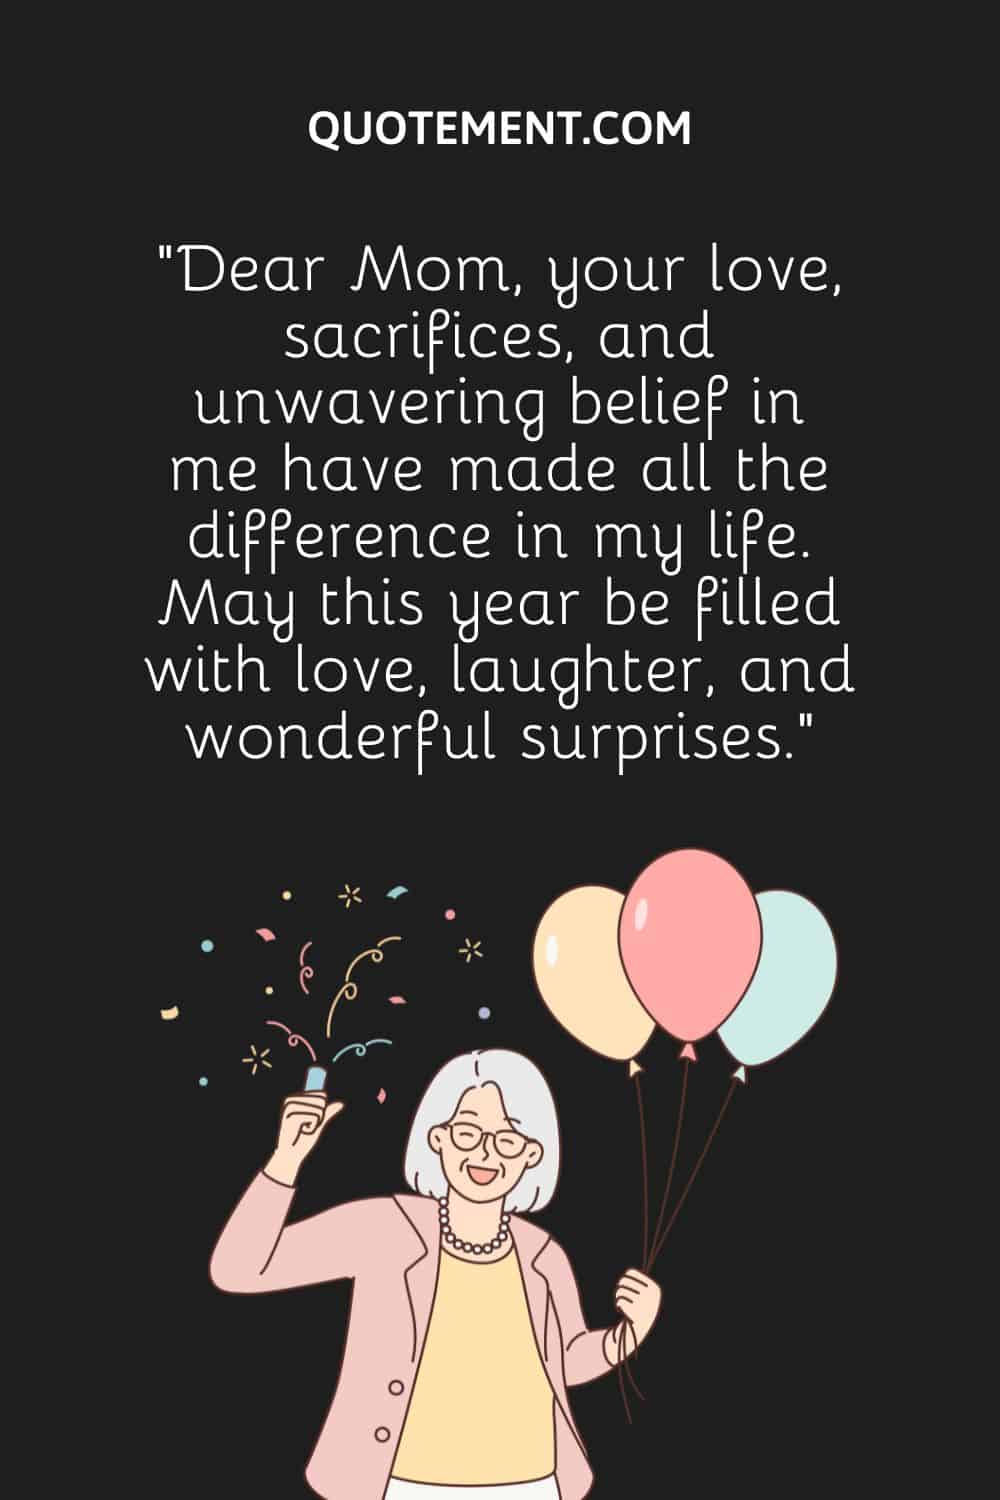 a smiling elderly woman holding birthday balloons and confetti
